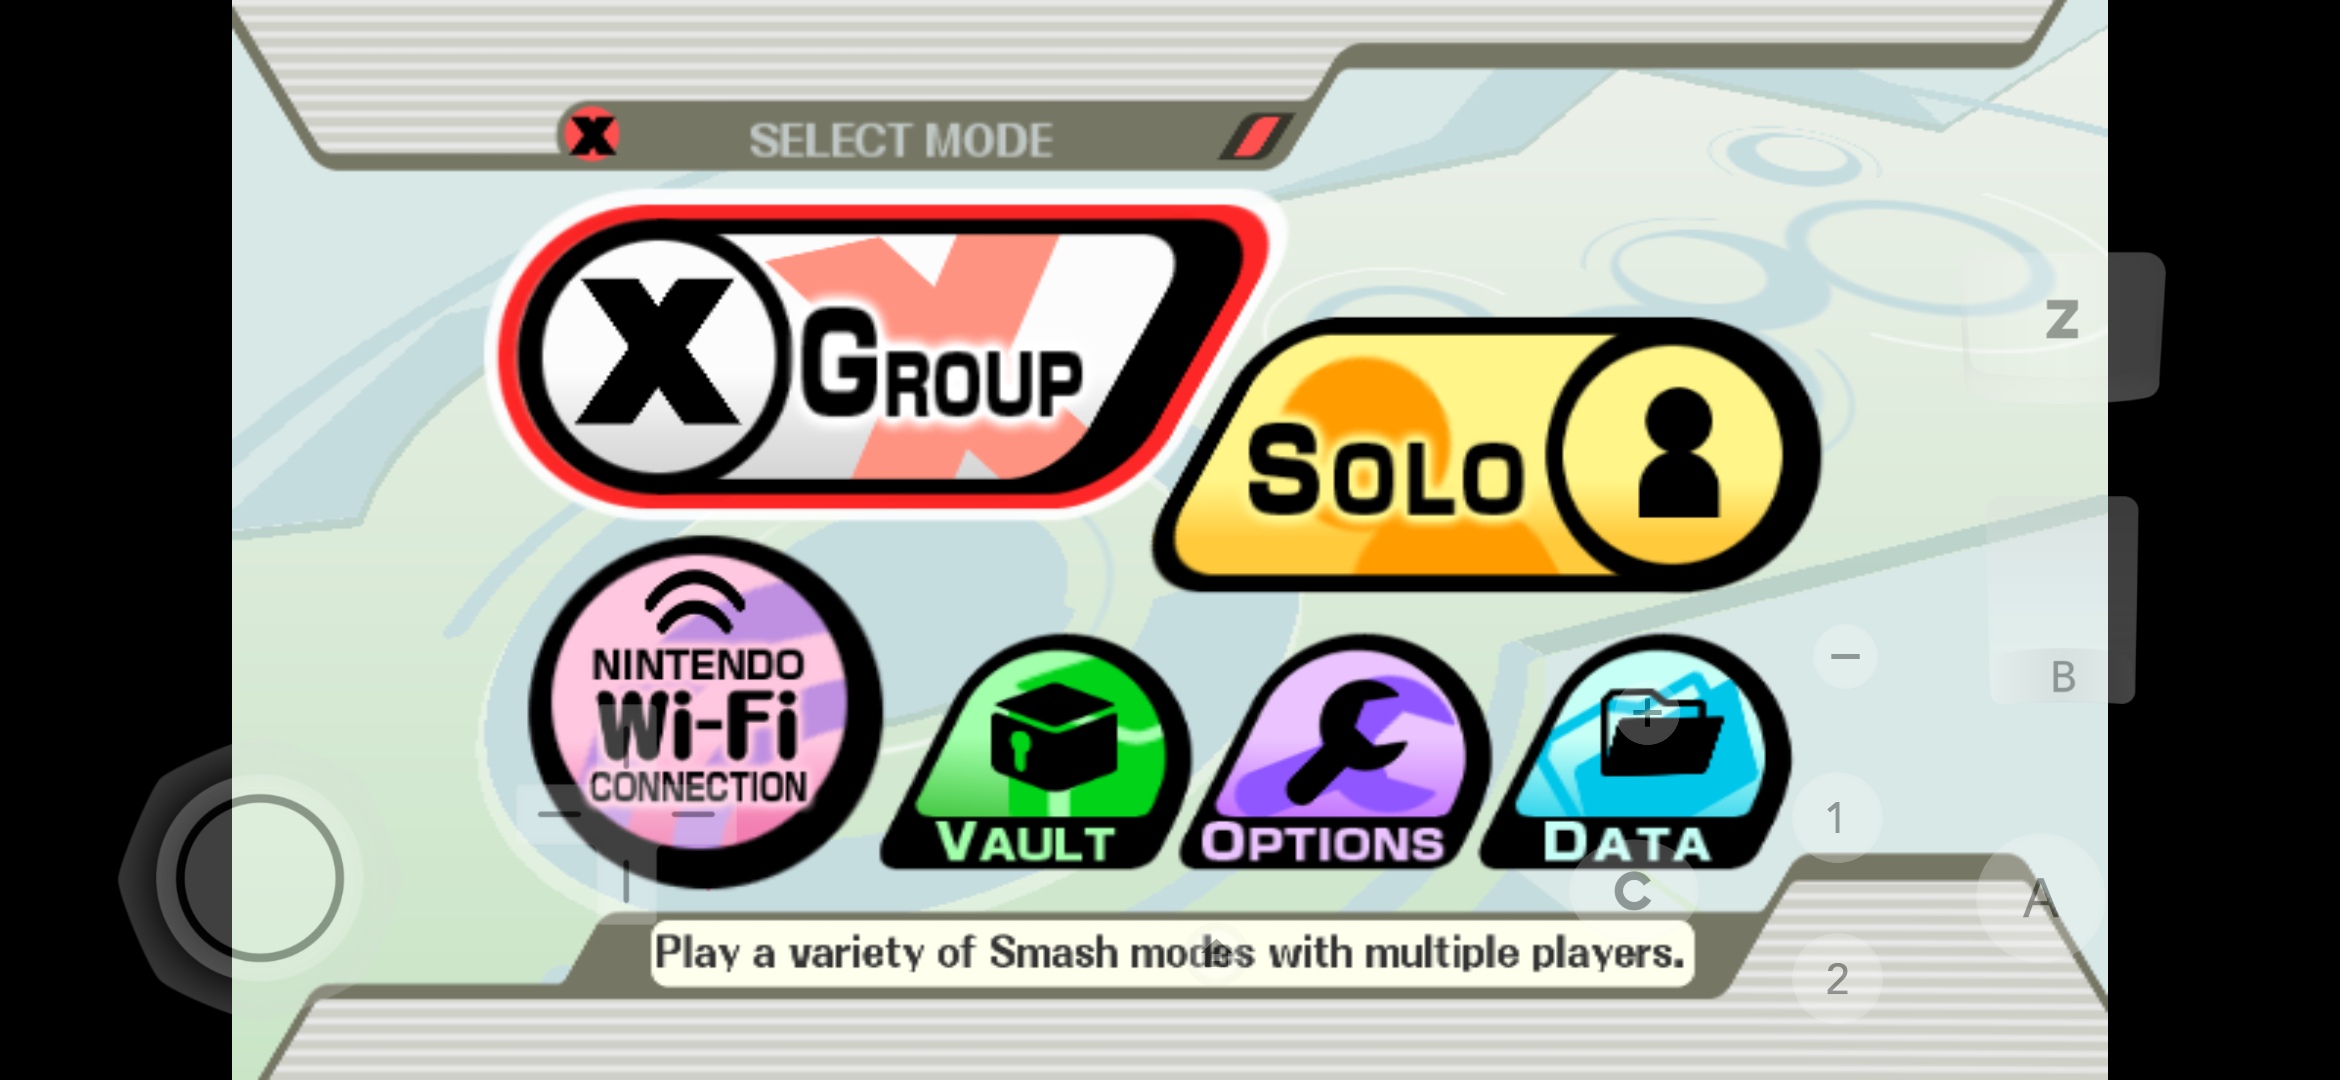 Download And How To Install Game Wii Super Smash Bros Brawl For Emulator Dolphin Android